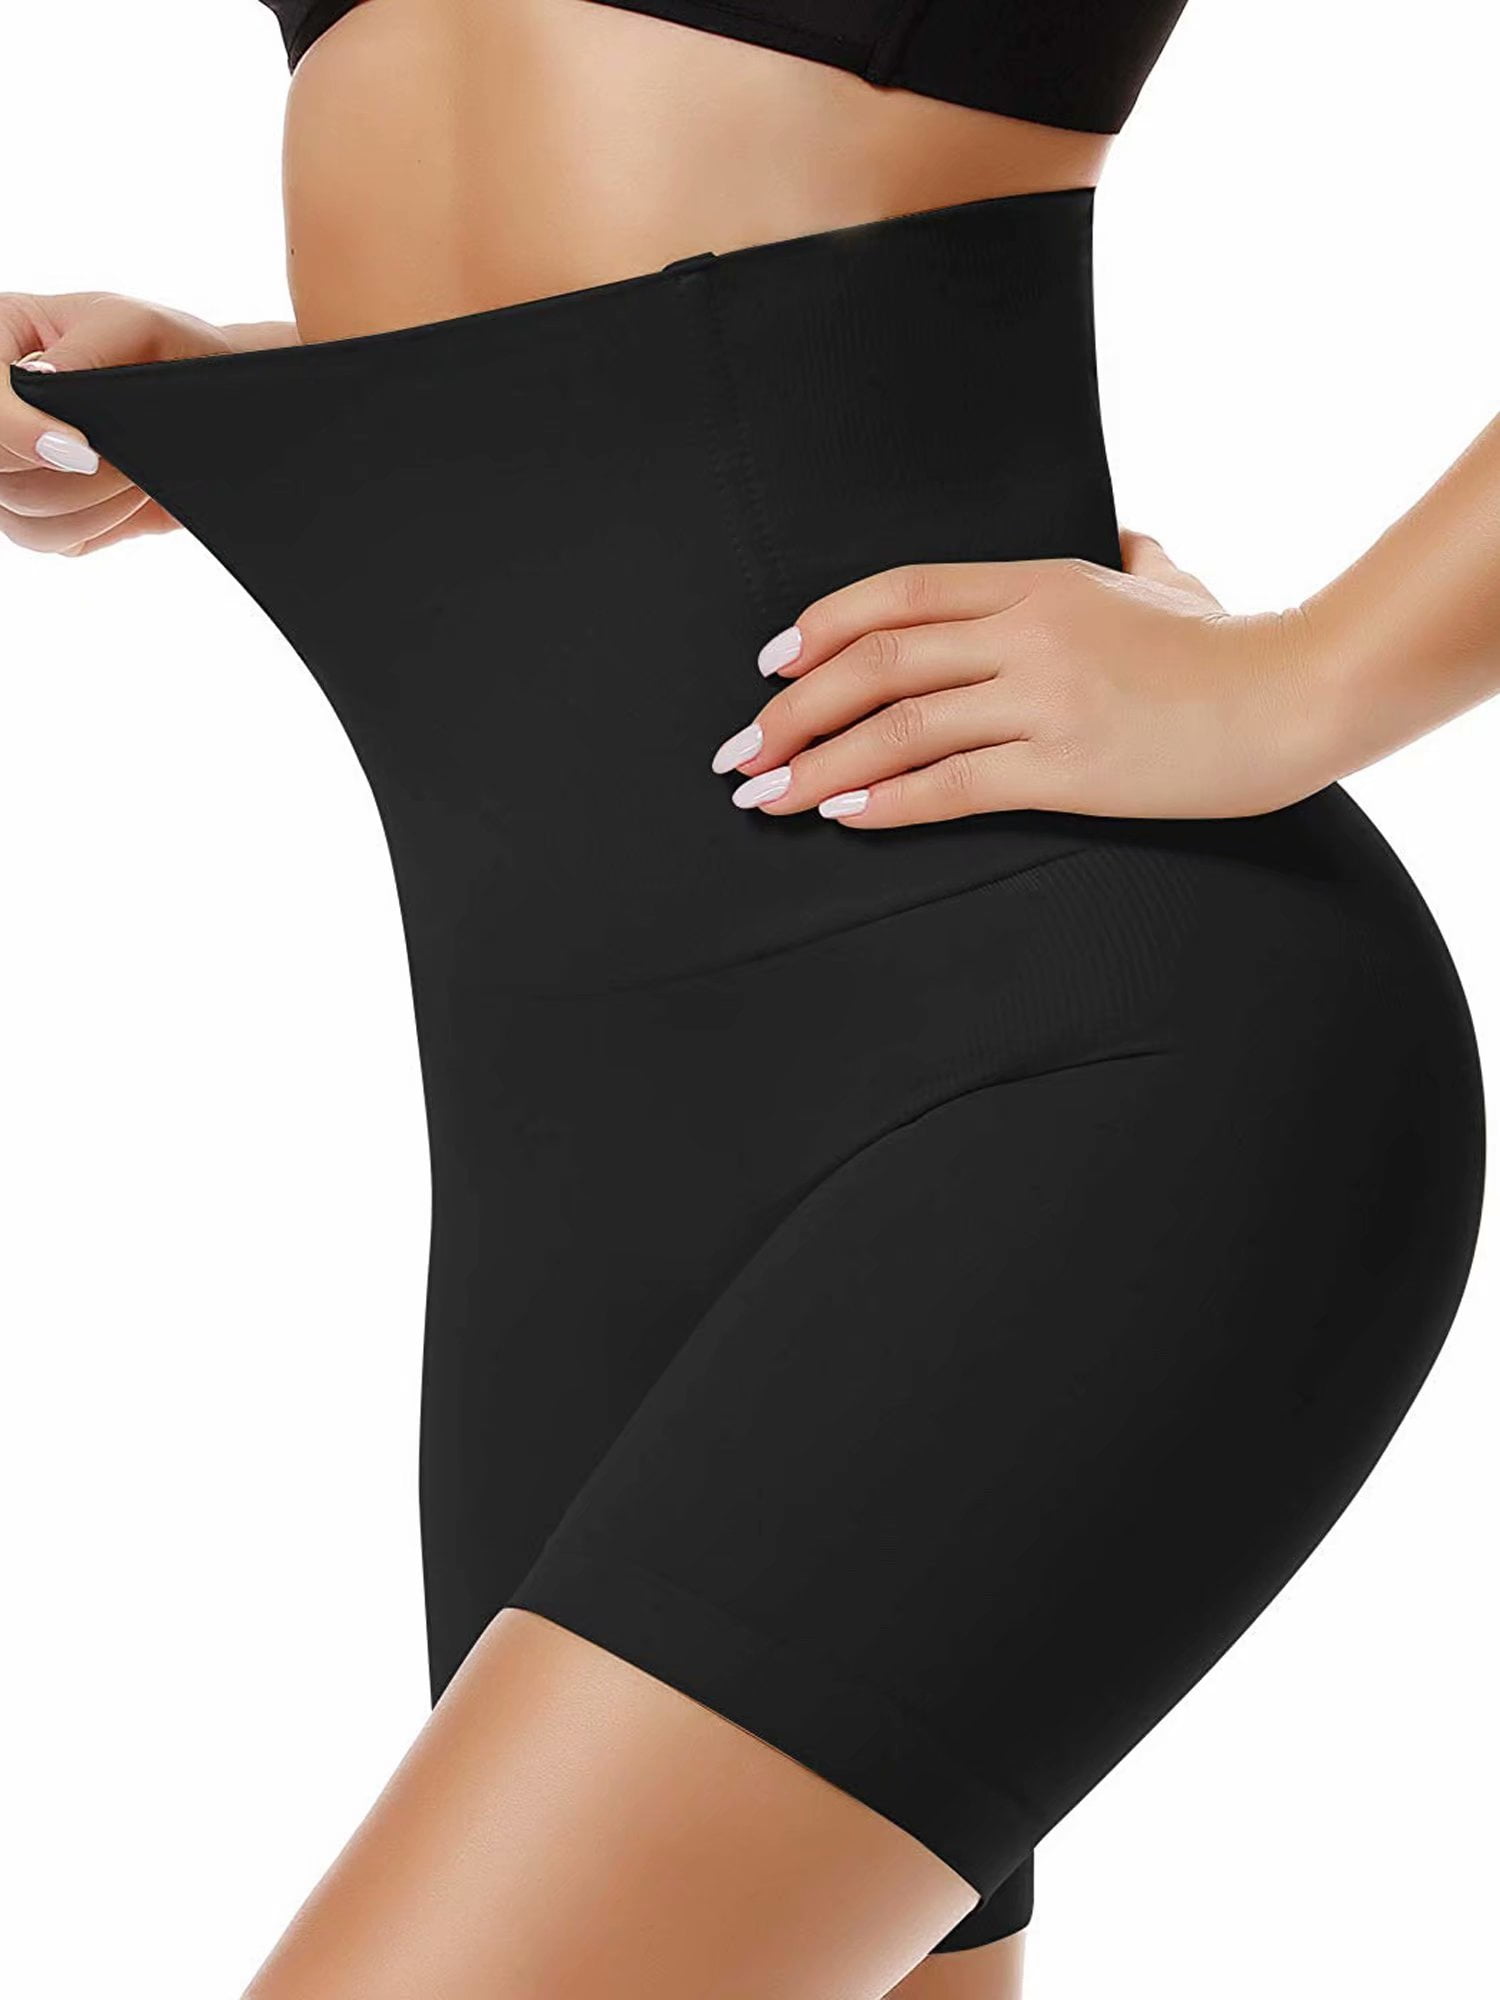 Details about   Women Tummy Control Panties High-Waisted Body Shaper Shorts Slimming  Underwear 